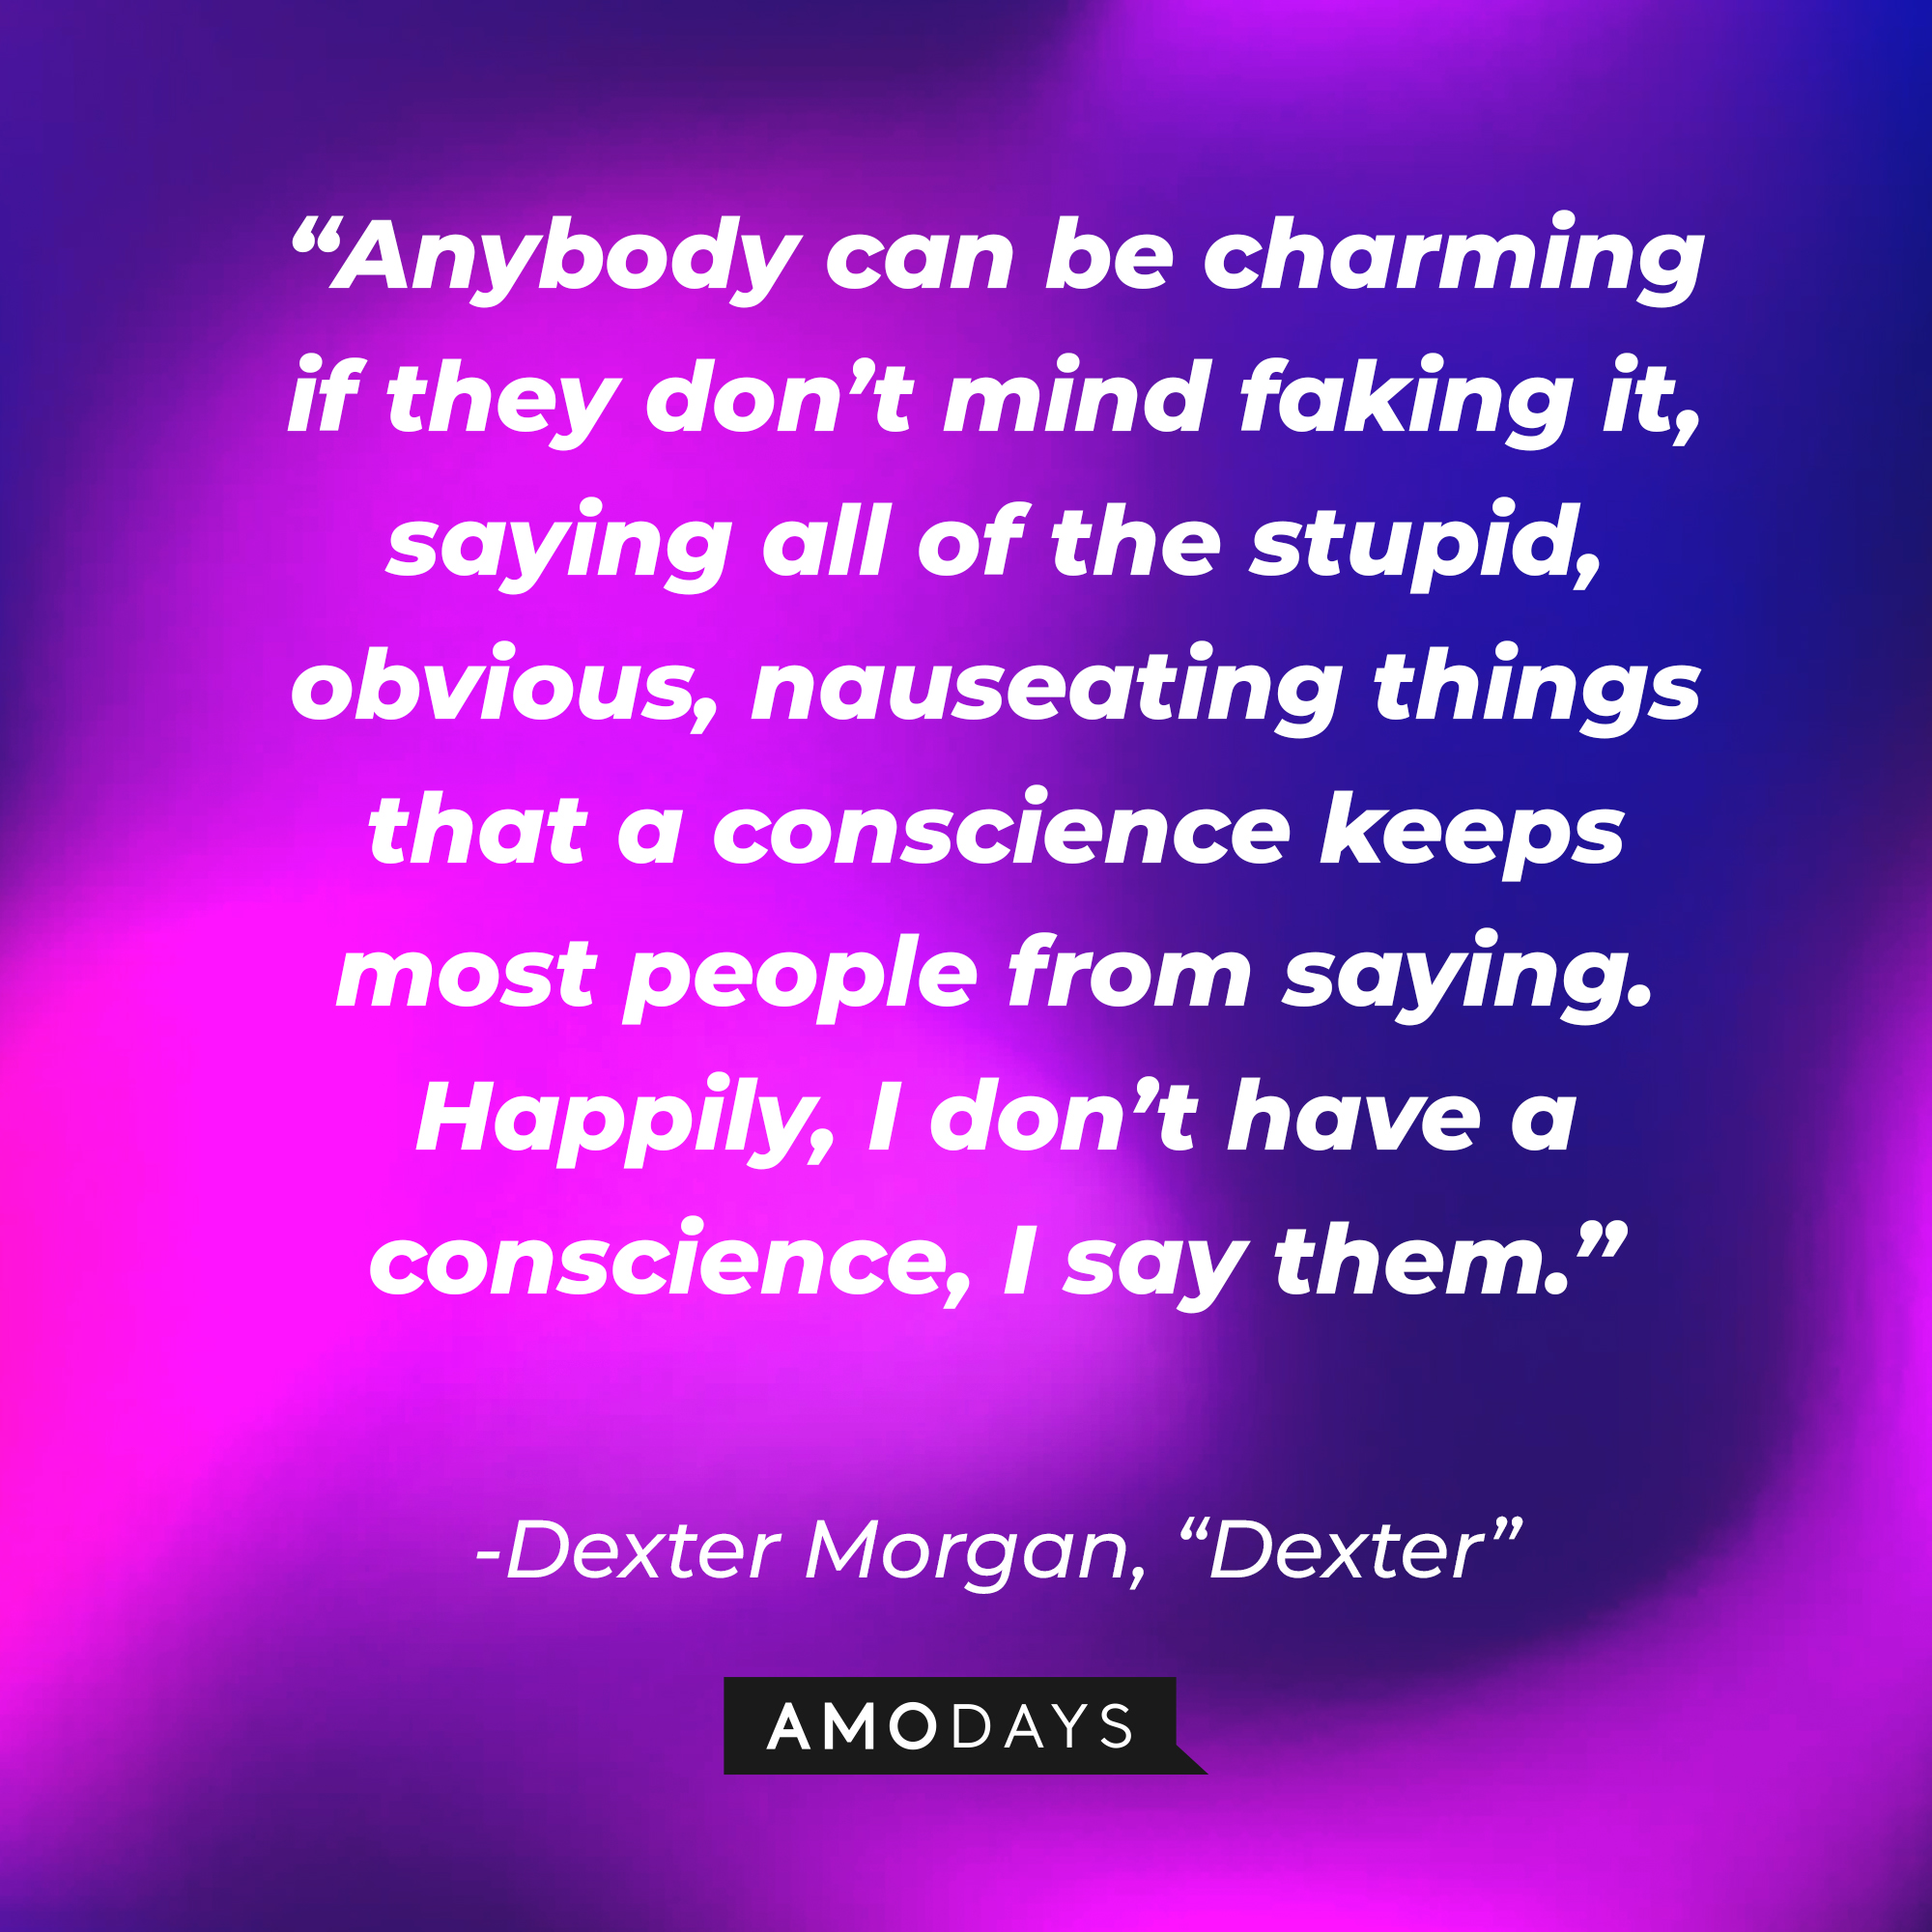 Dexter Morgan's quote from "Dexter:" “Anybody can be charming if they don’t mind faking it, saying all of the stupid, obvious, nauseating things that a conscience keeps most people from saying. Happily, I don’t have a conscience, I say them.”  | Source: AmoDays